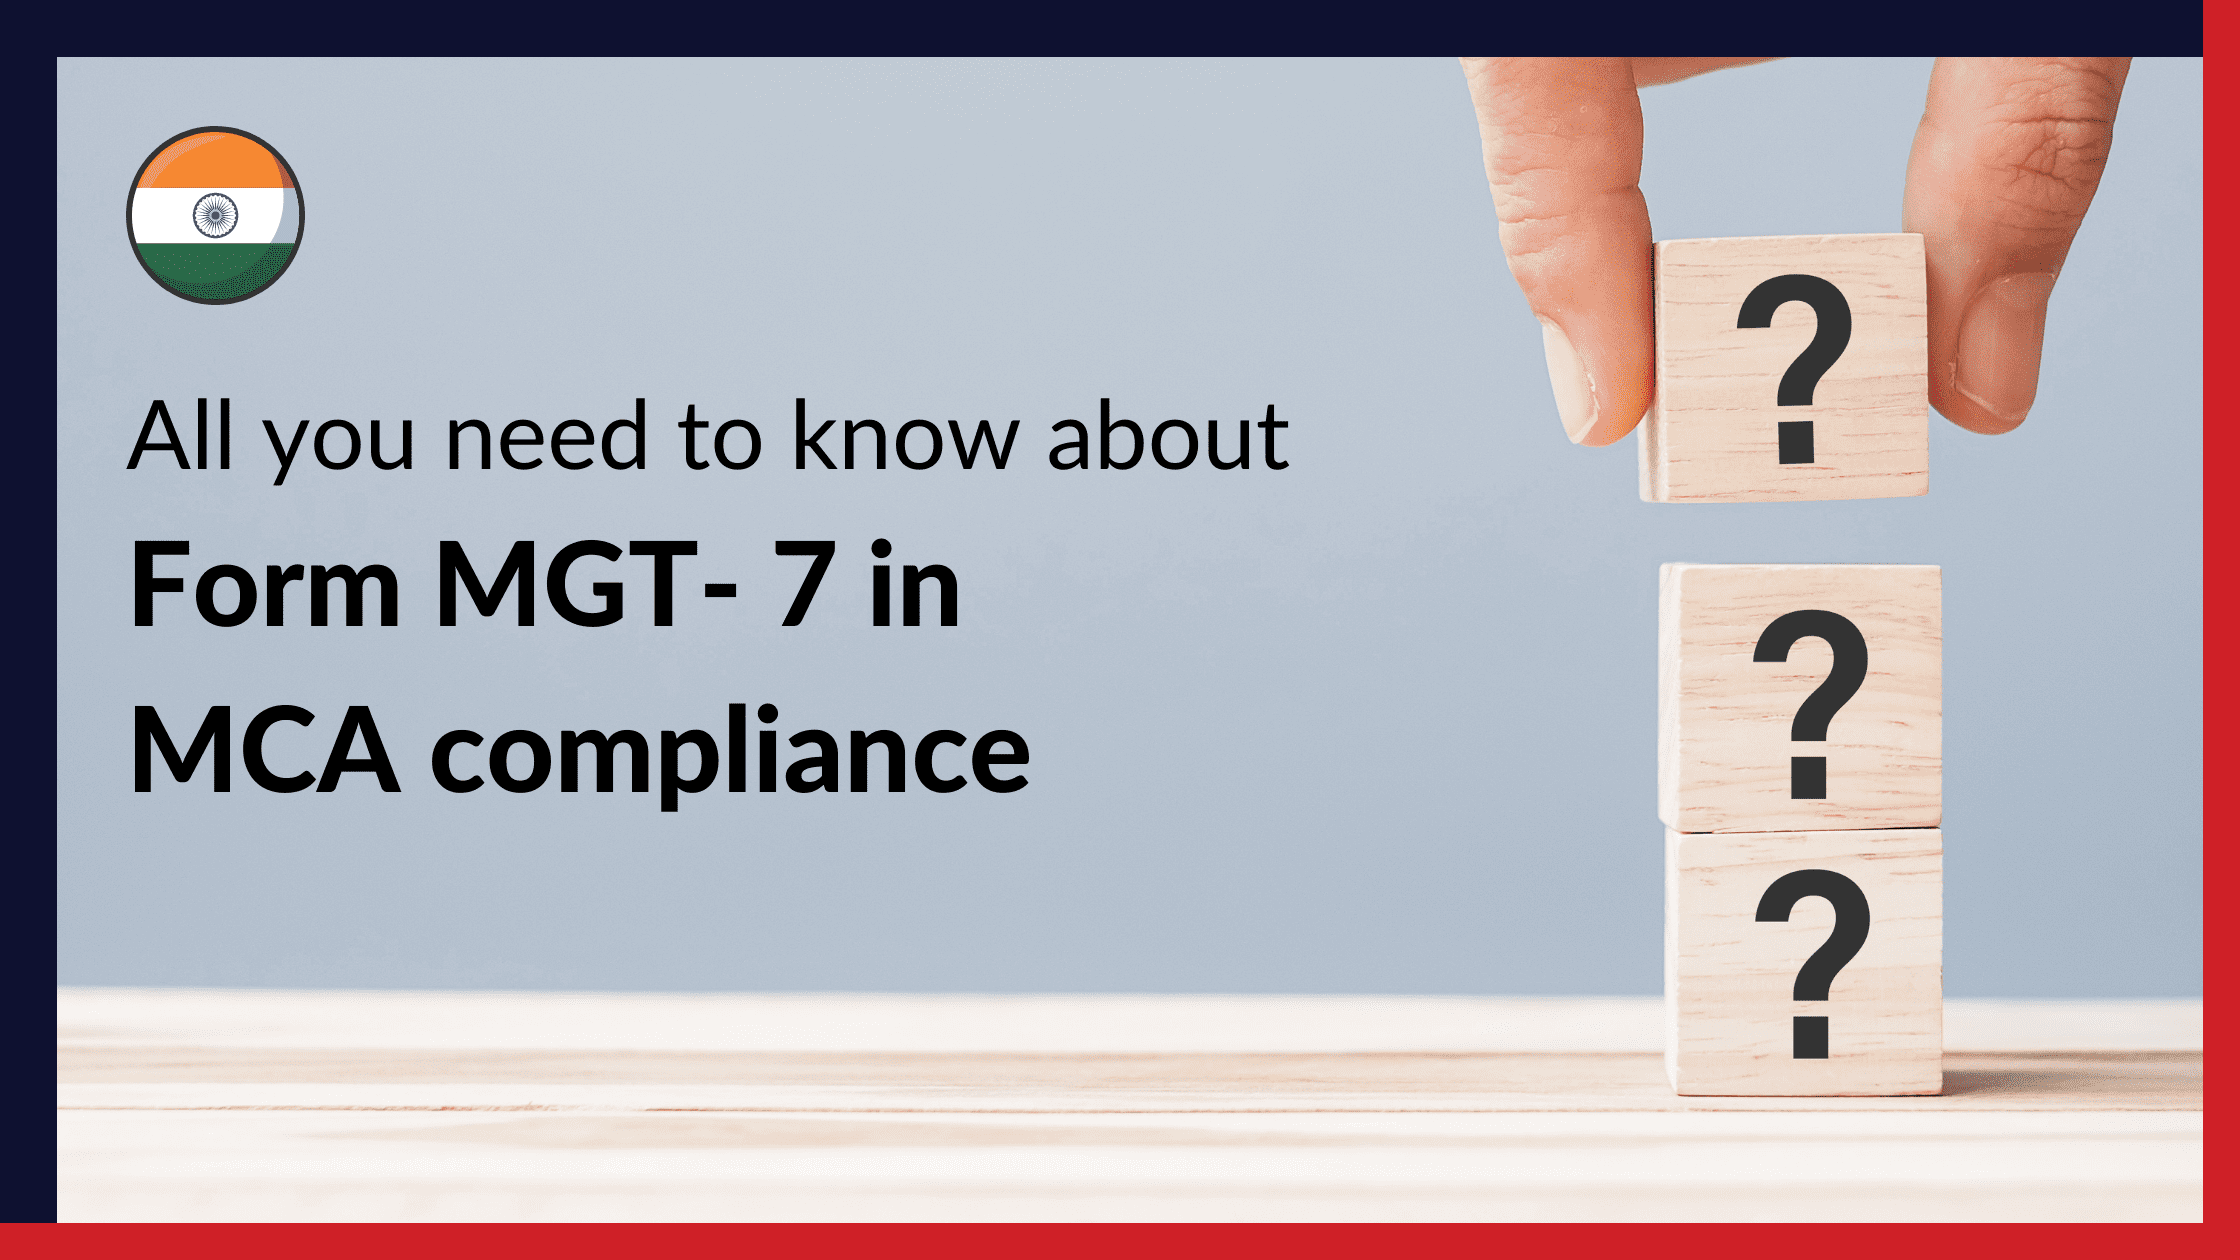 All you need to know about Form MGT-7